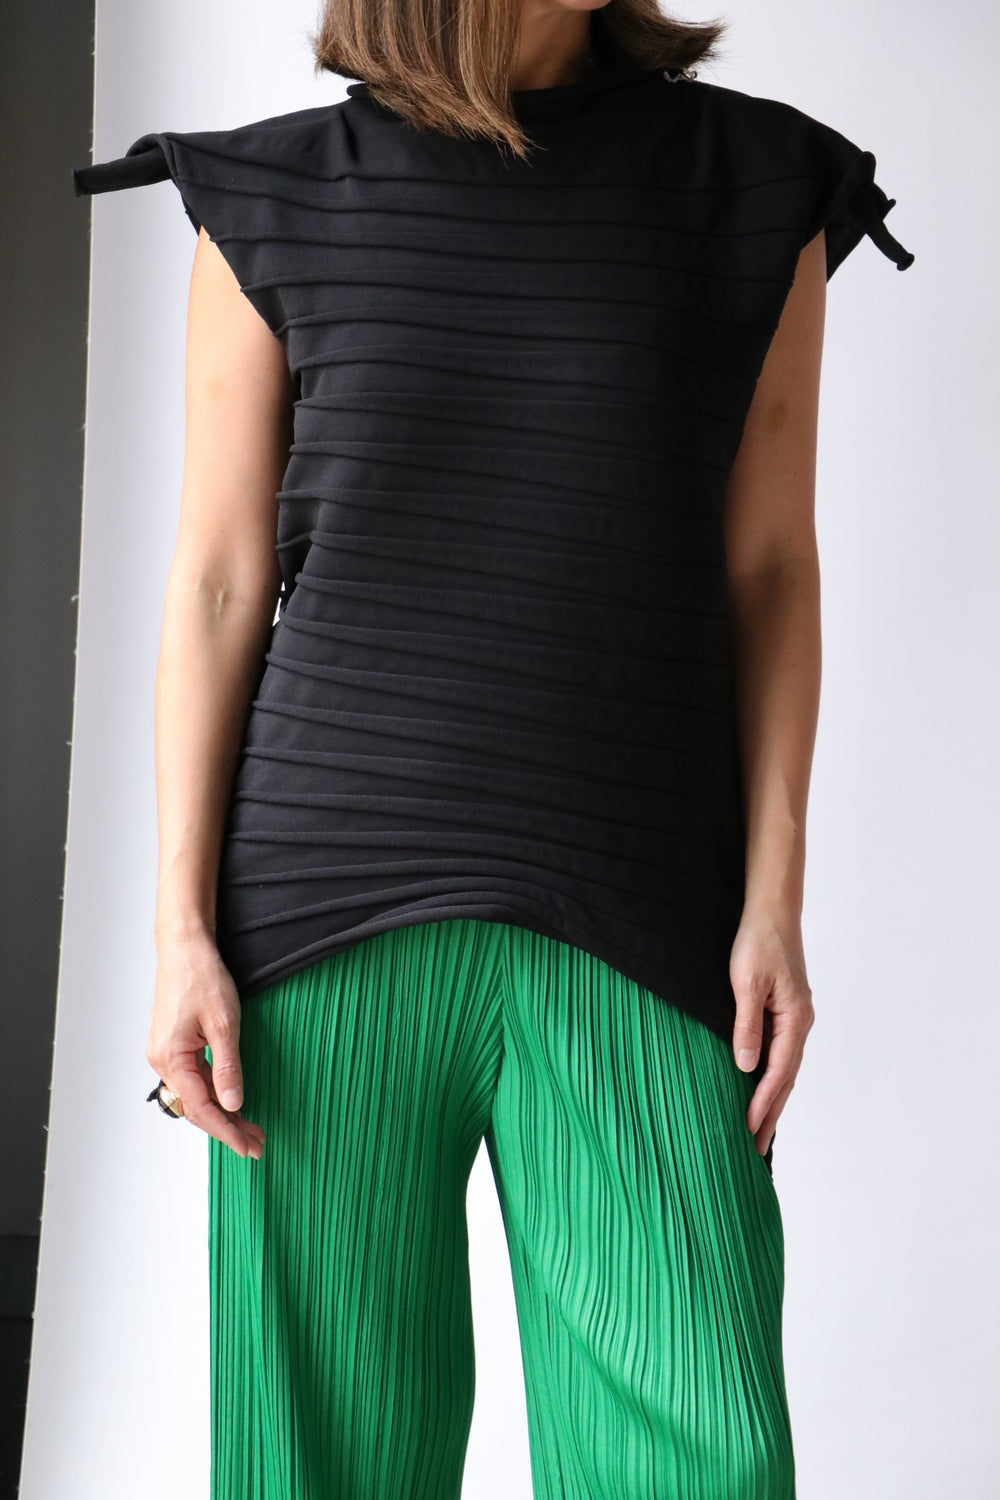 Pleats Please by Issey Miyake Chili Knit in Black